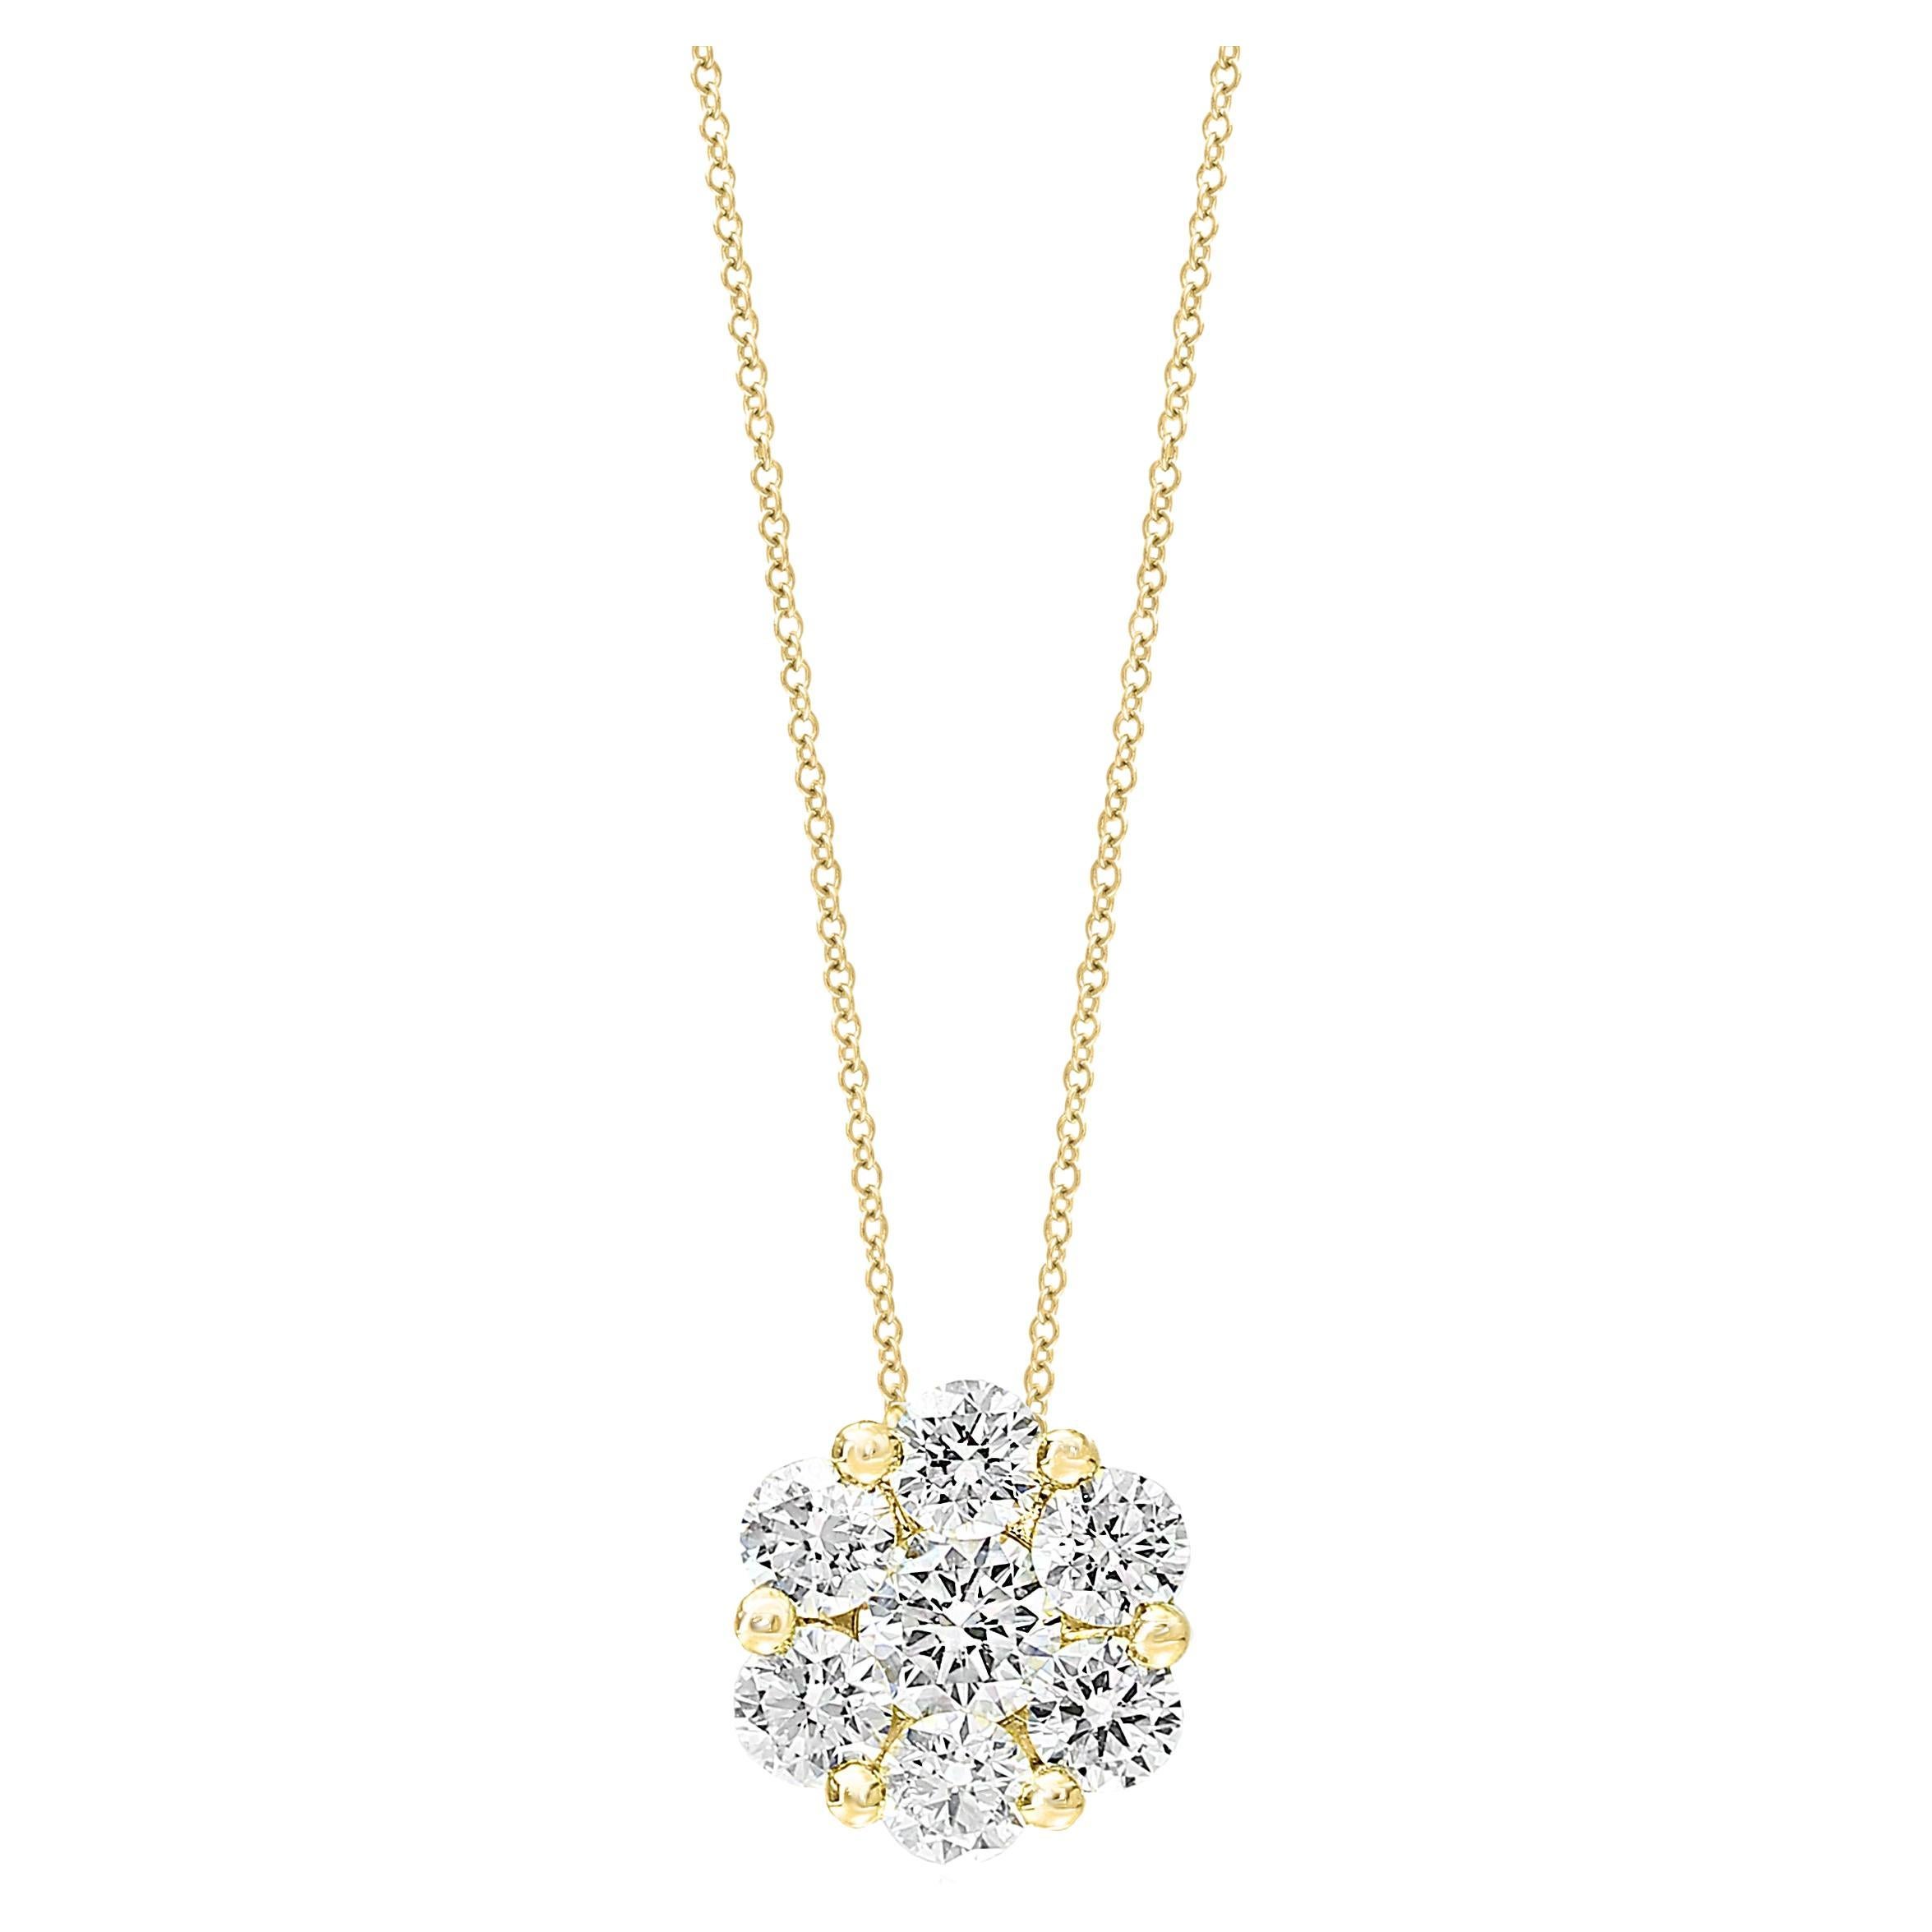 0.51 Carat Round Diamond Cluster Flower Pendant Necklace in 18k Yellow Gold